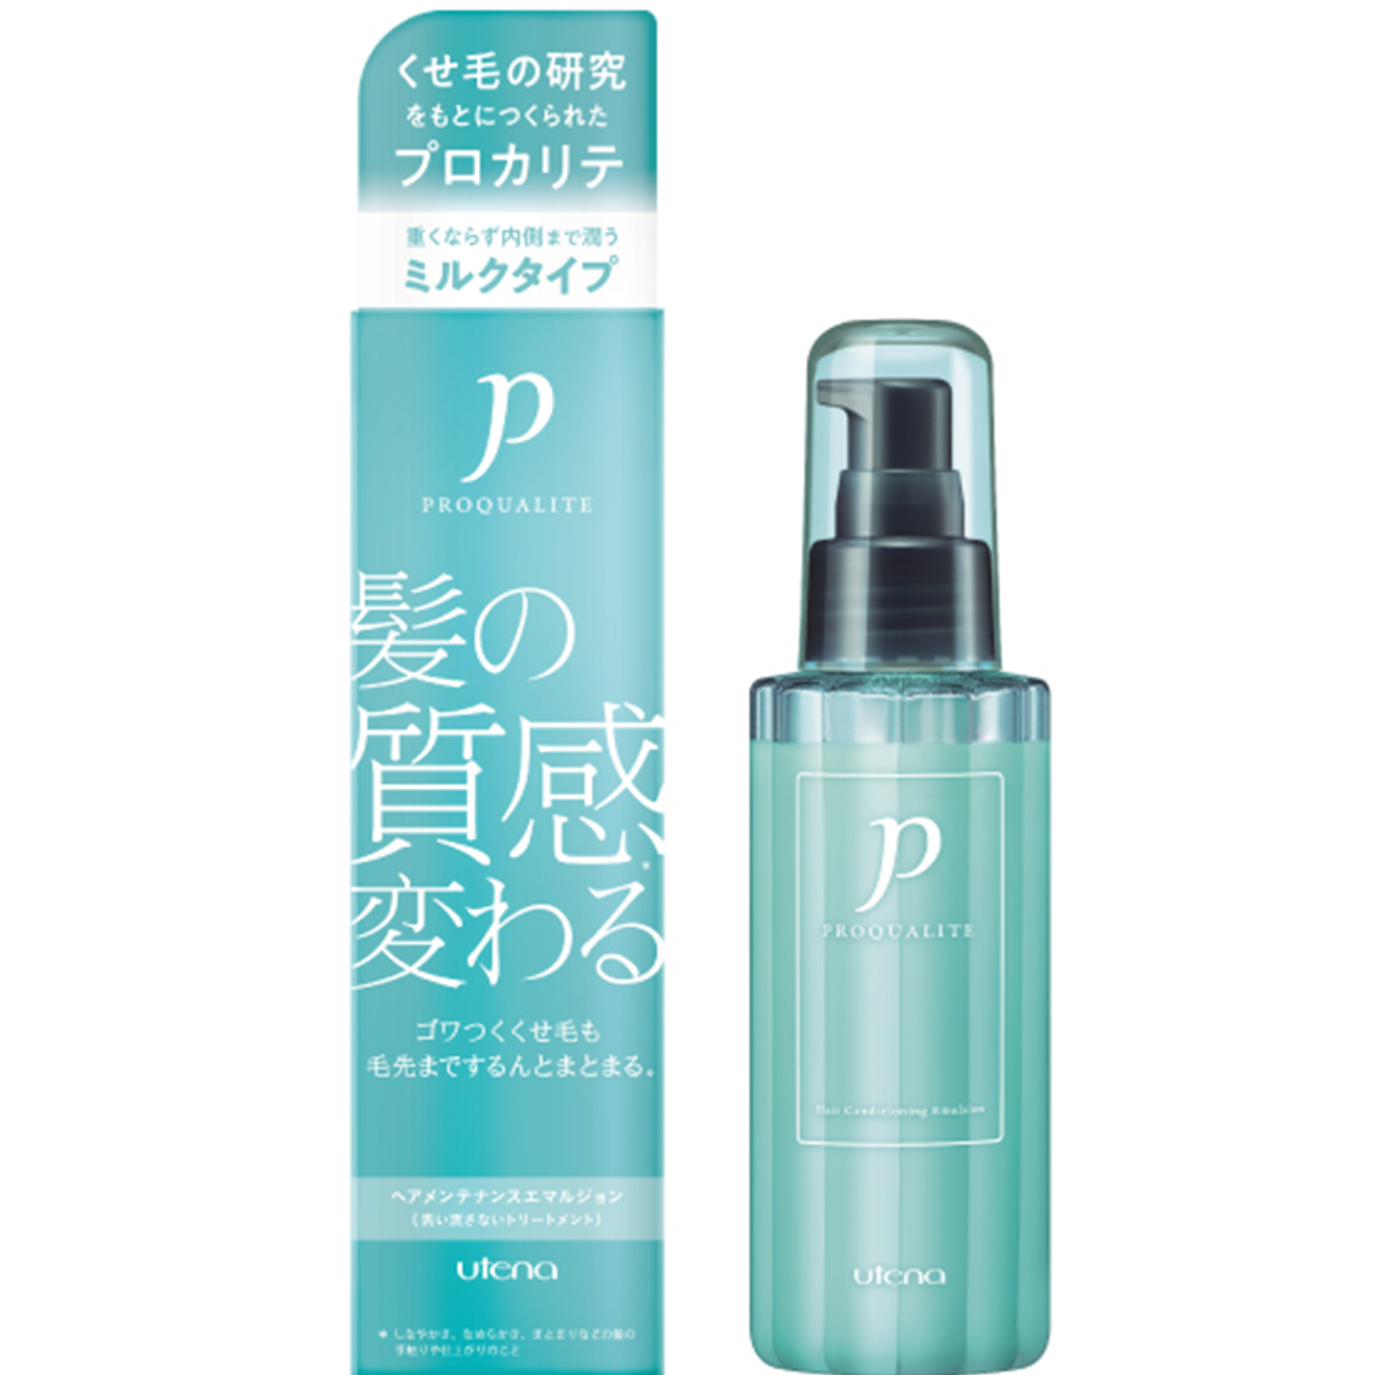 Utena PROQUALITE Hair Maintenance Emulsion - 110ml - Harajuku Culture Japan - Japanease Products Store Beauty and Stationery